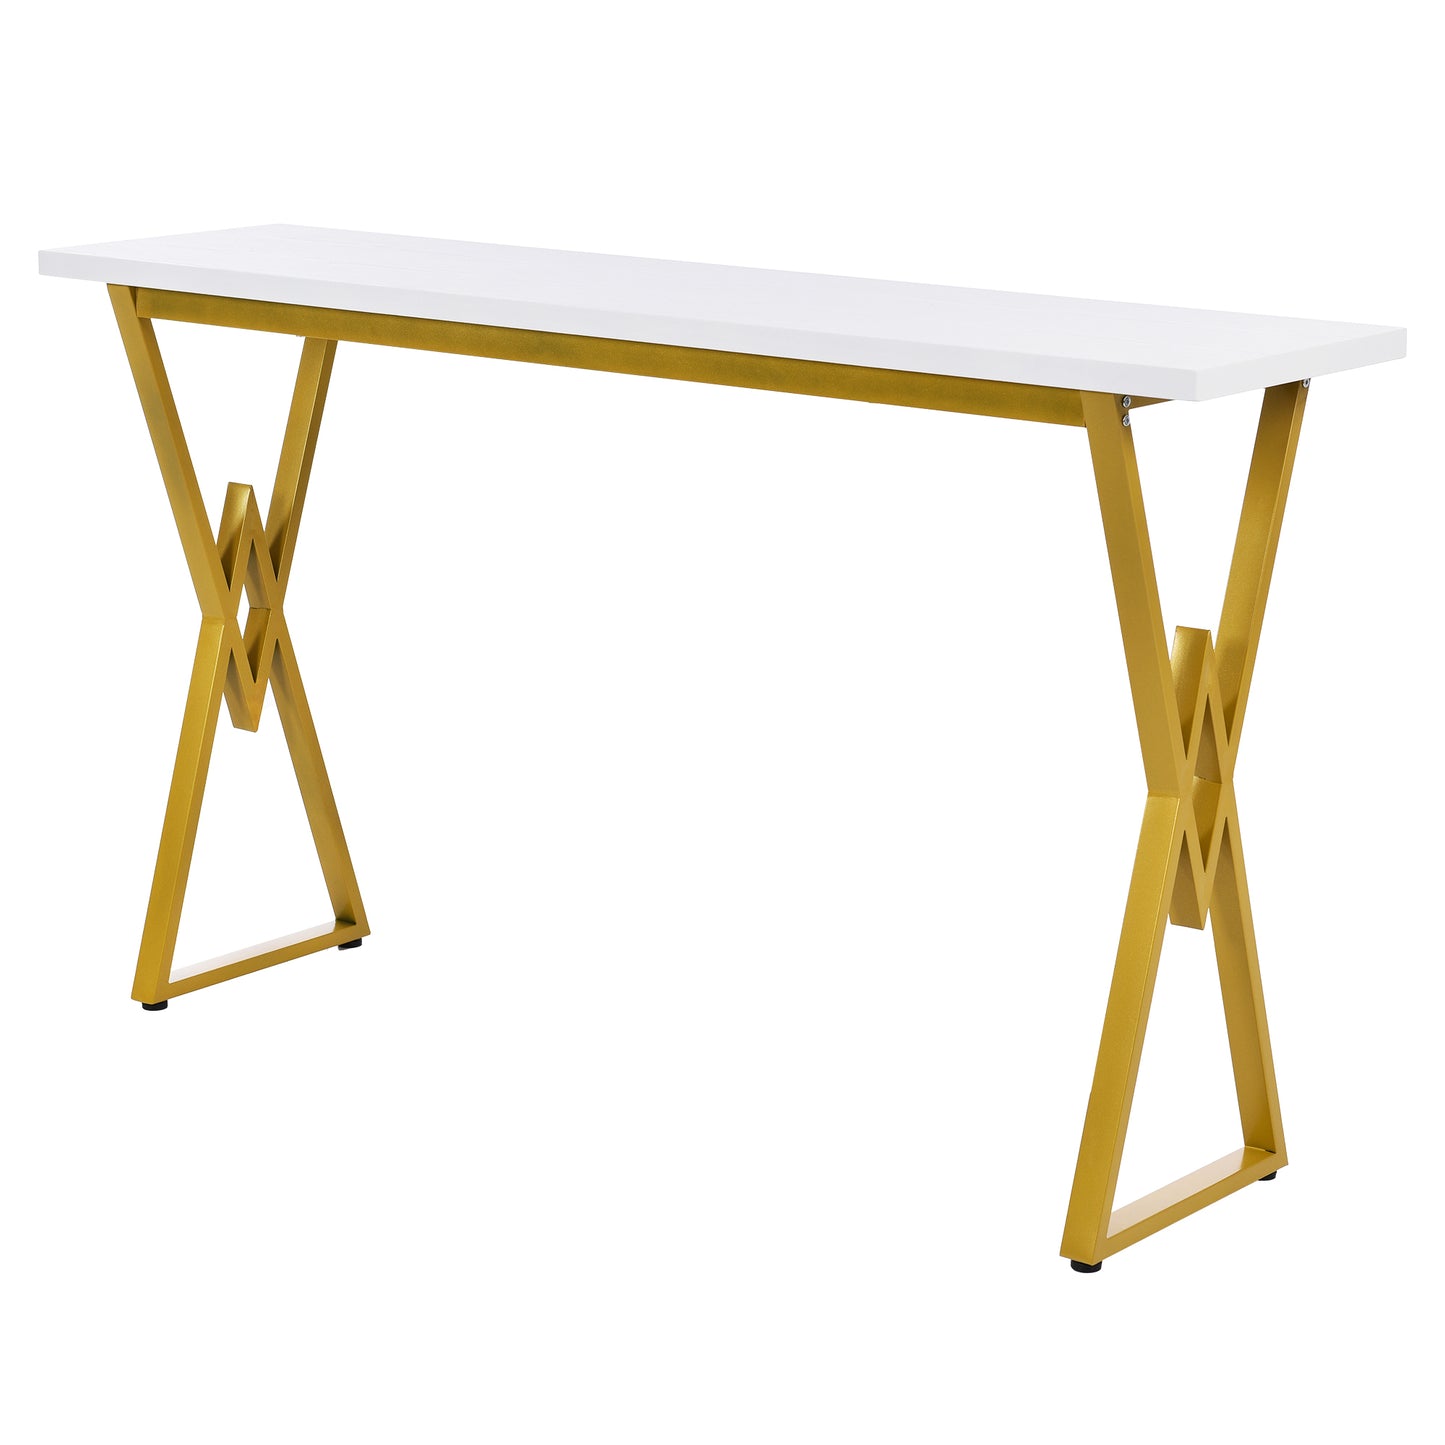 TOPMAX Modern 4-Piece Counter Height Extra Long Console Bar Dining Table Set with 3 Padded Stools for Small Places, Gold